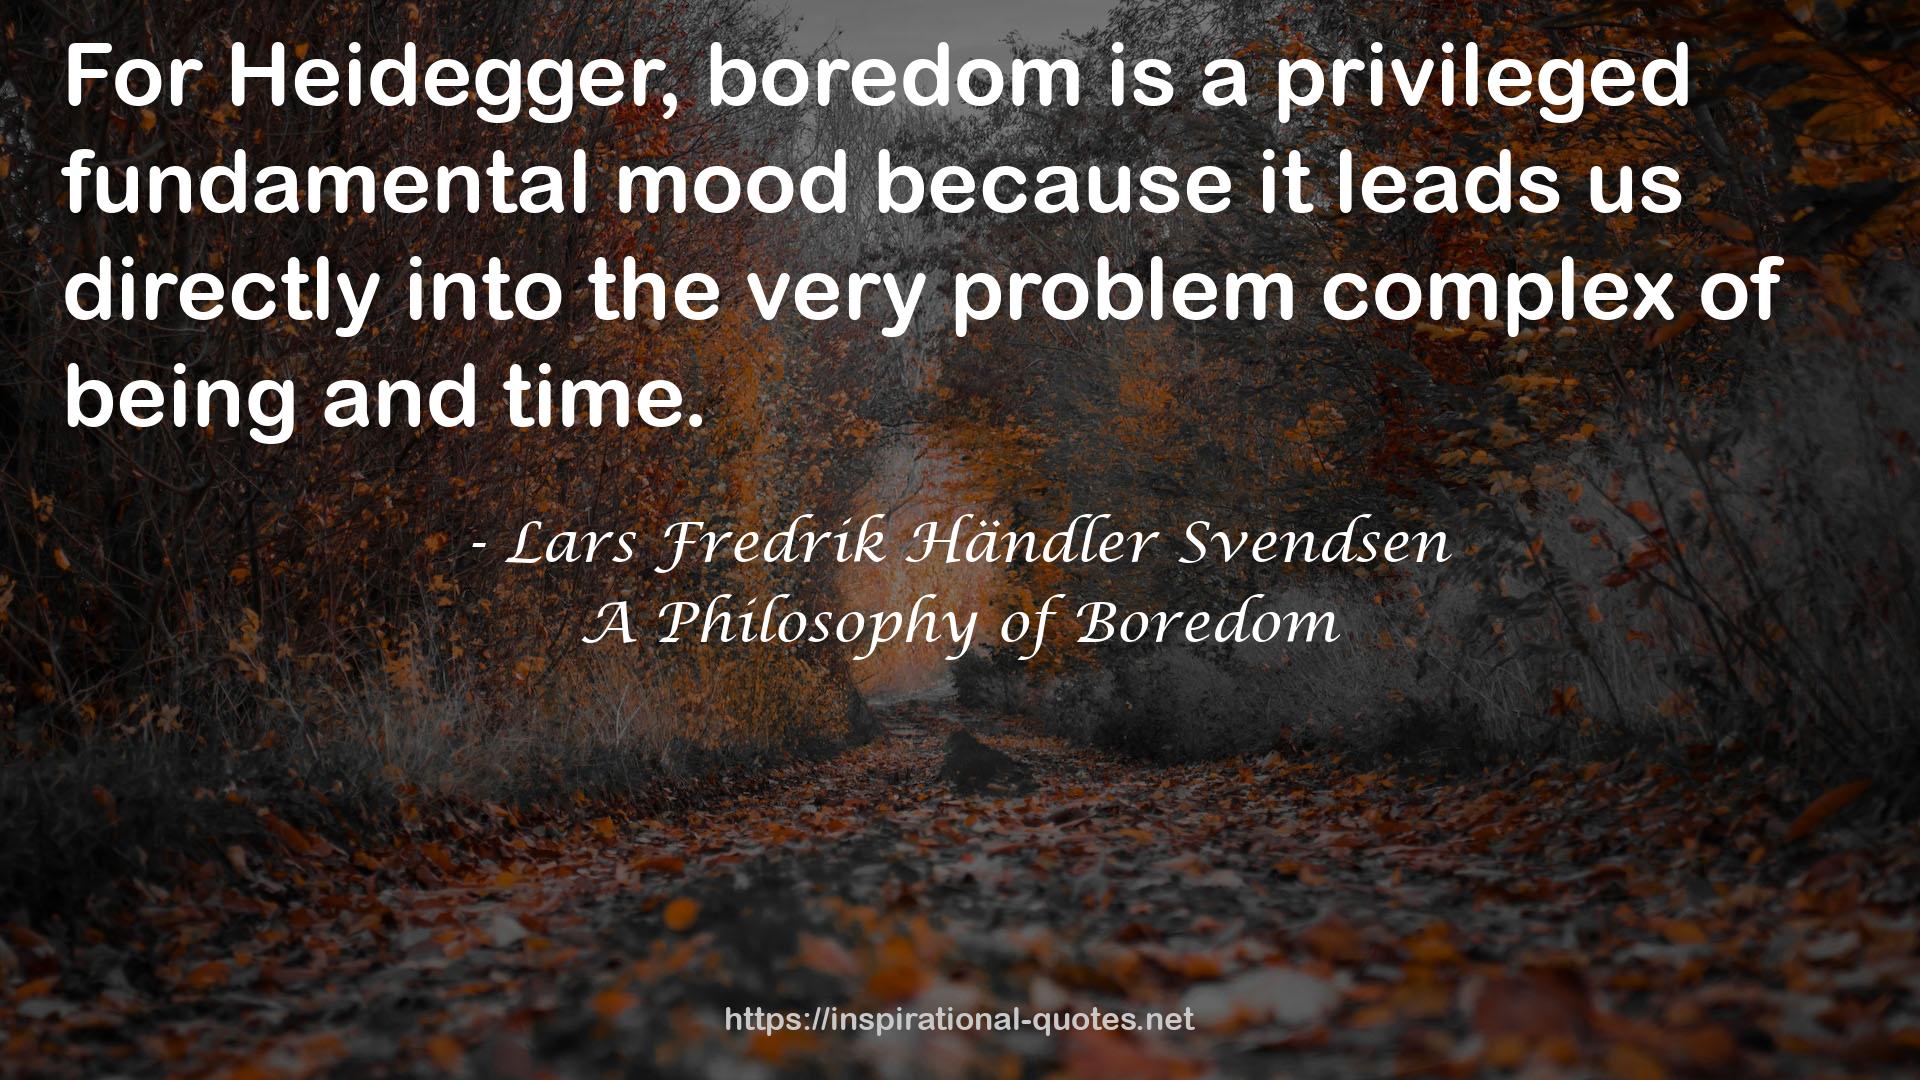 A Philosophy of Boredom QUOTES